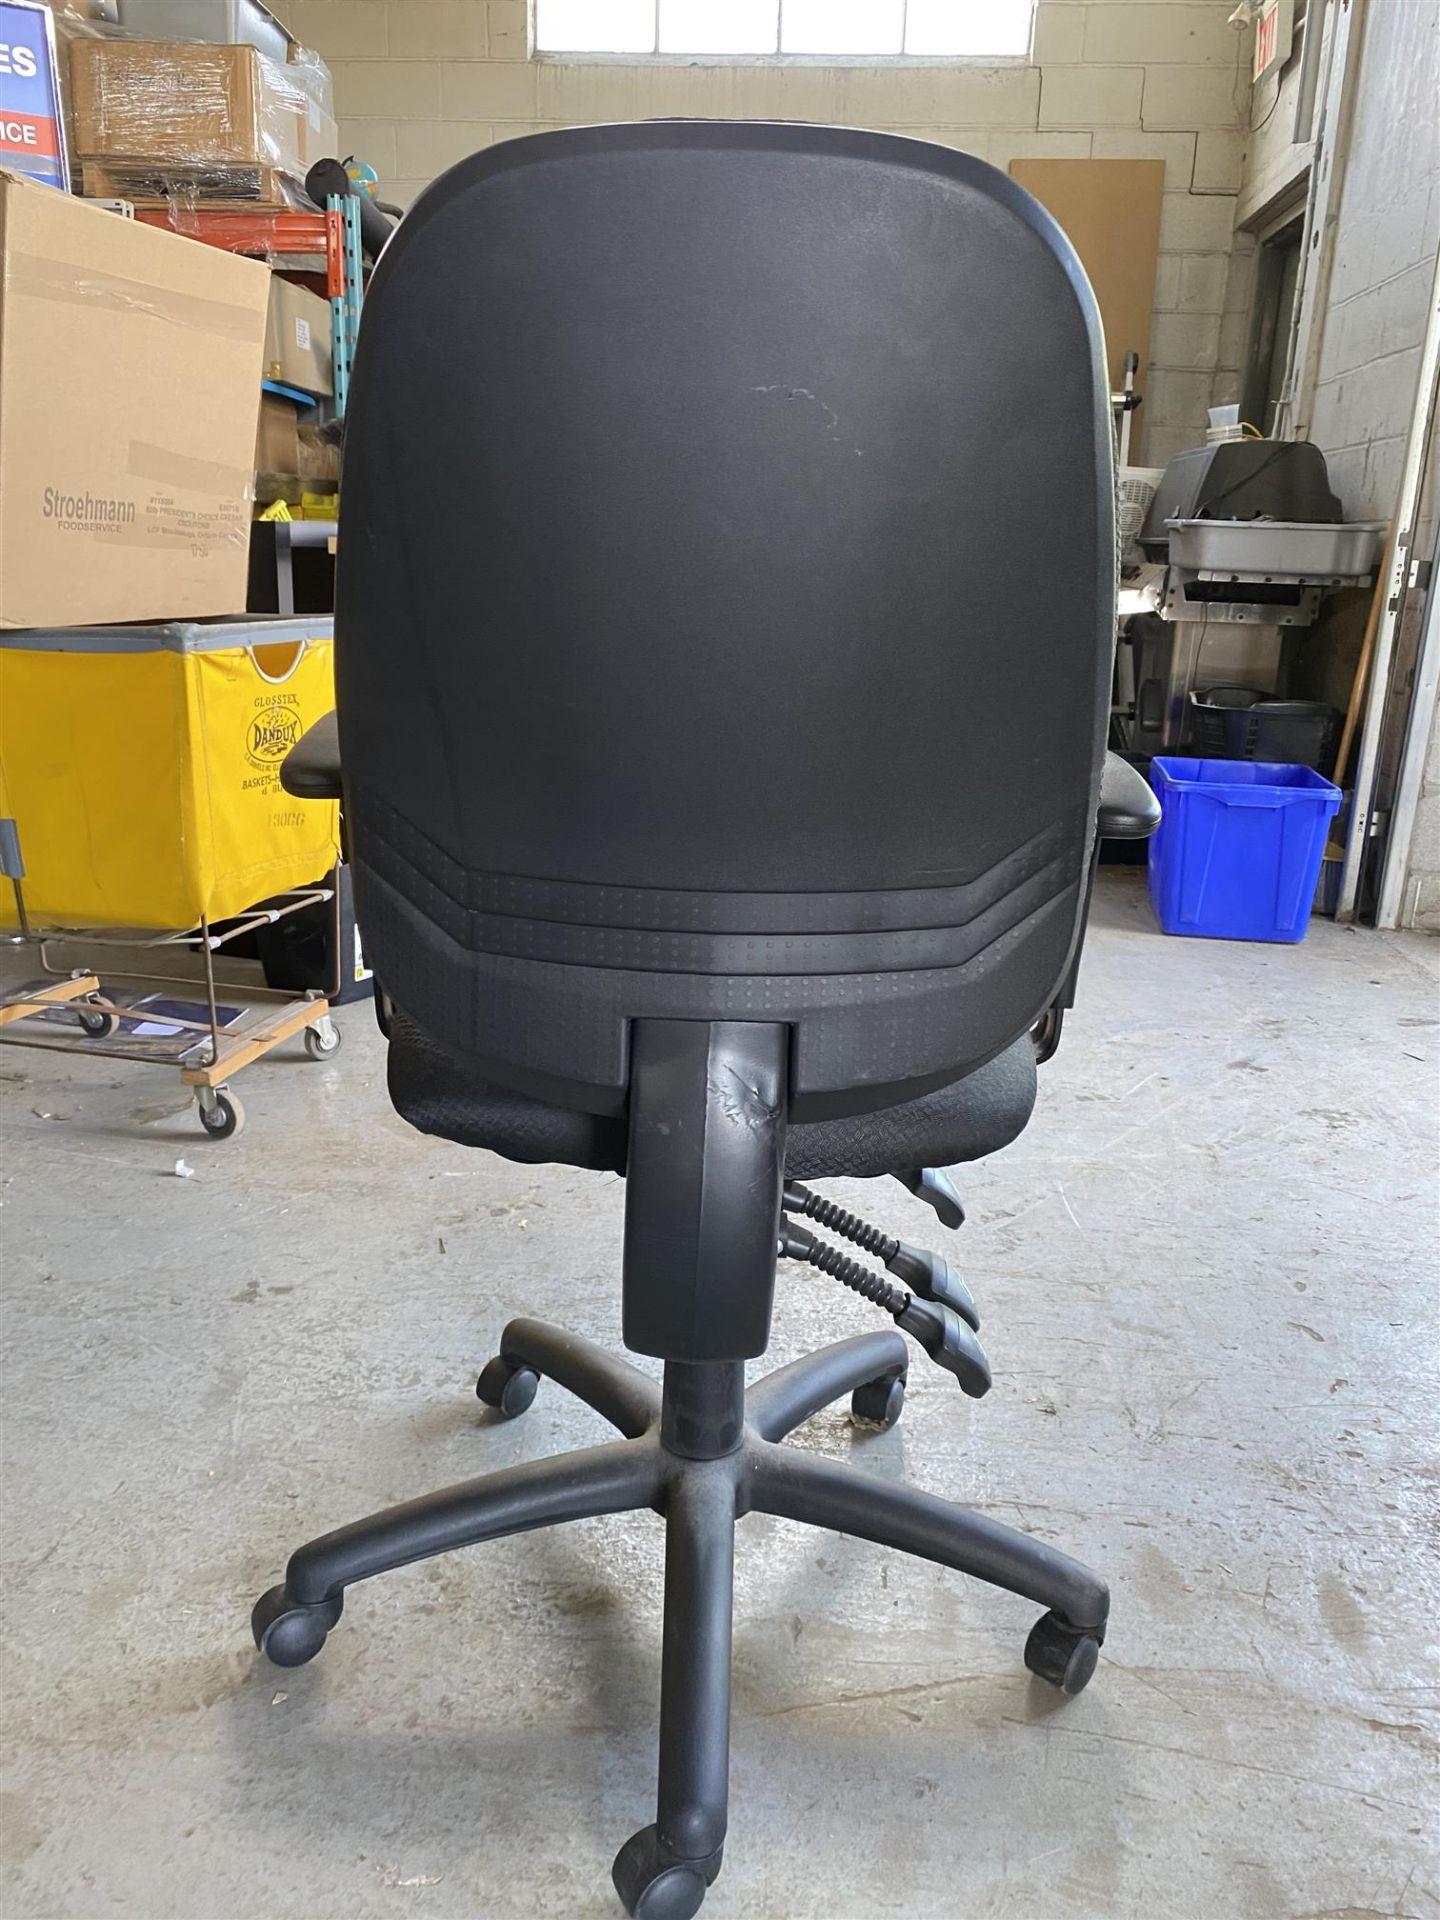 BLACK ROLLING OFFICE CHAIR - 2PCS - Image 4 of 4